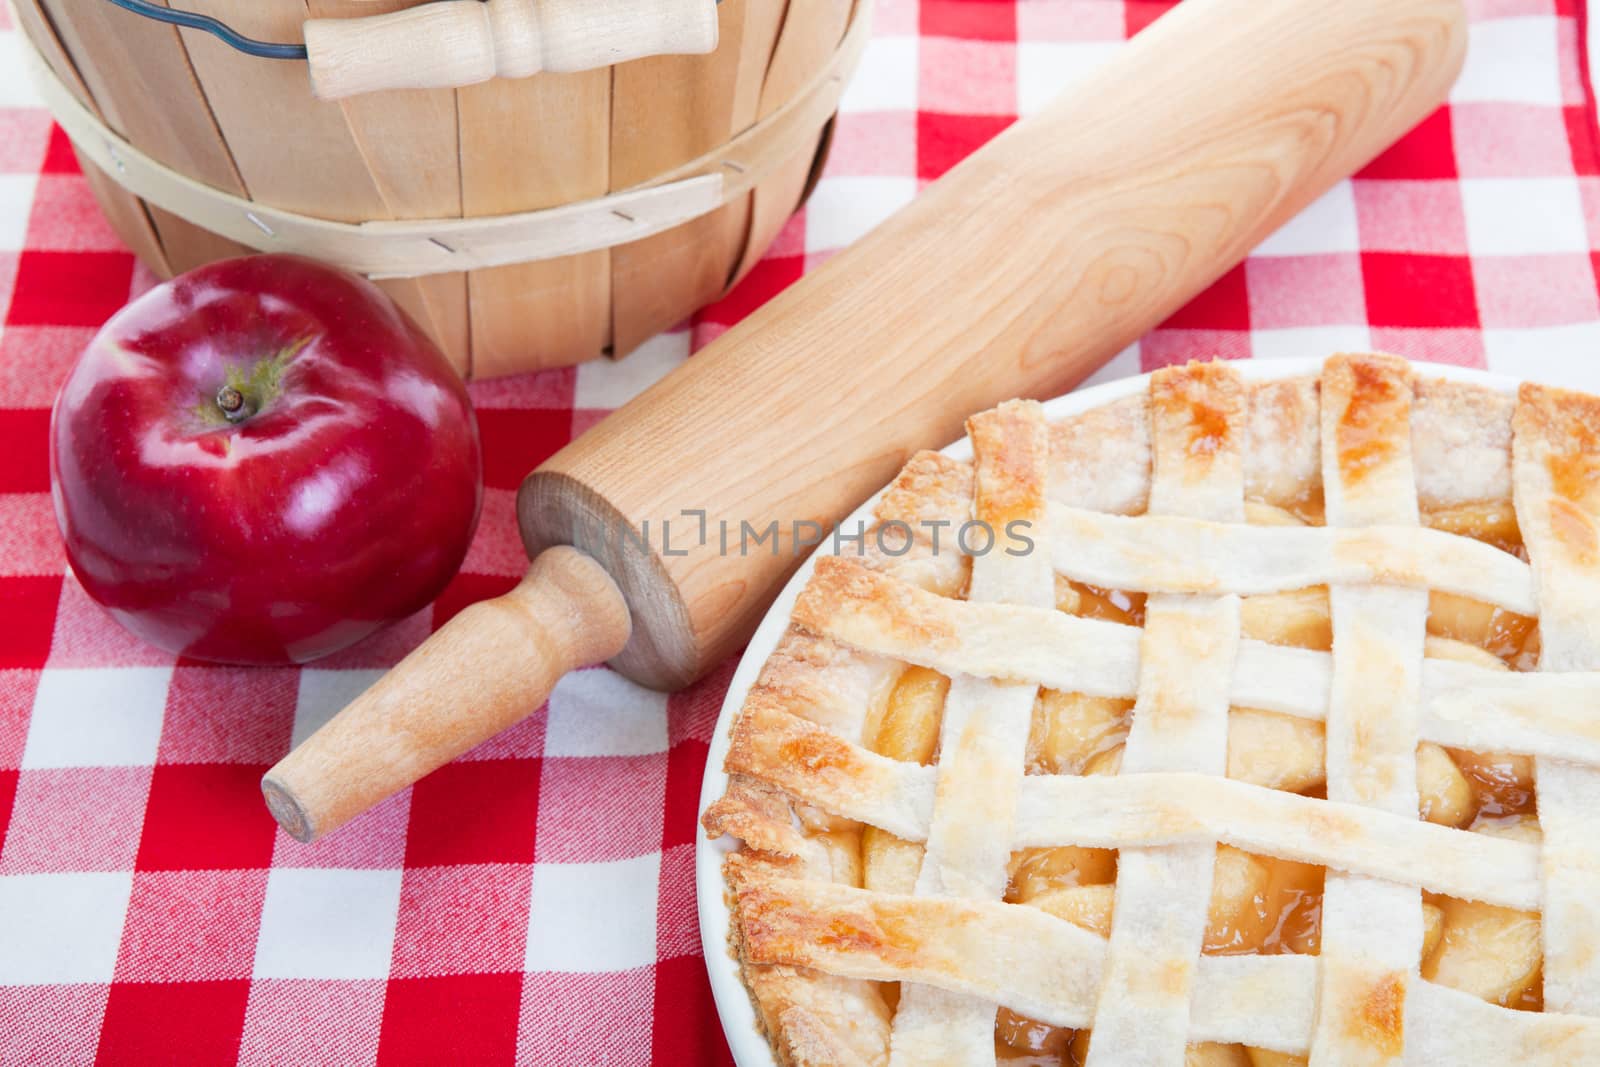 Delicious homemade apple pie cooling next to a rolling pin and a basket of apples.